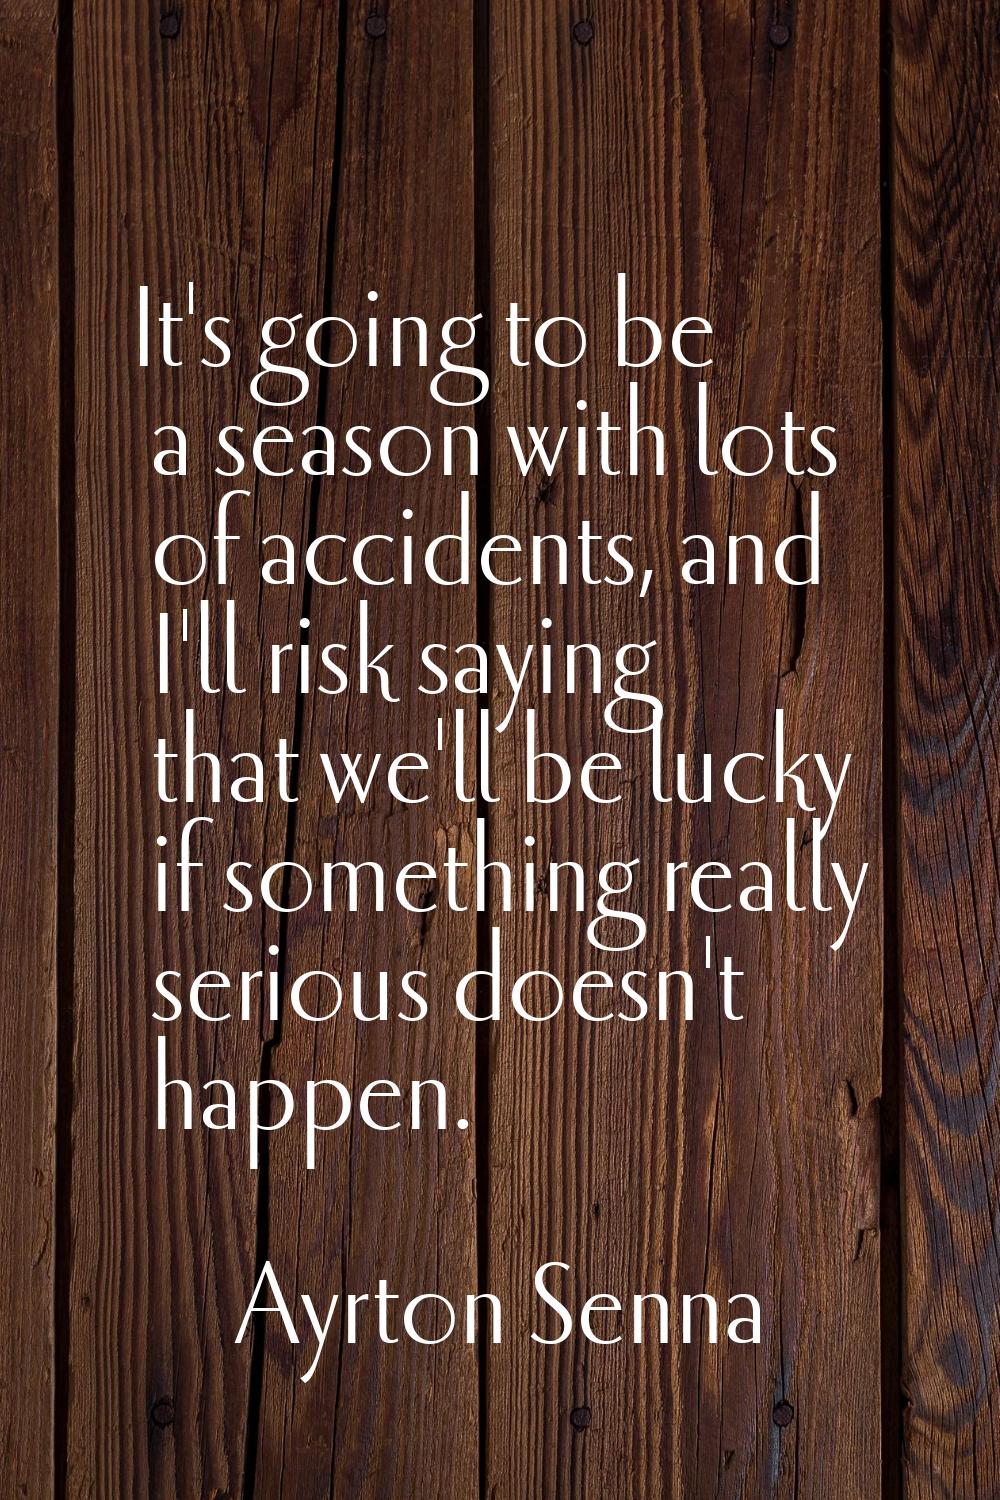 It's going to be a season with lots of accidents, and I'll risk saying that we'll be lucky if somet